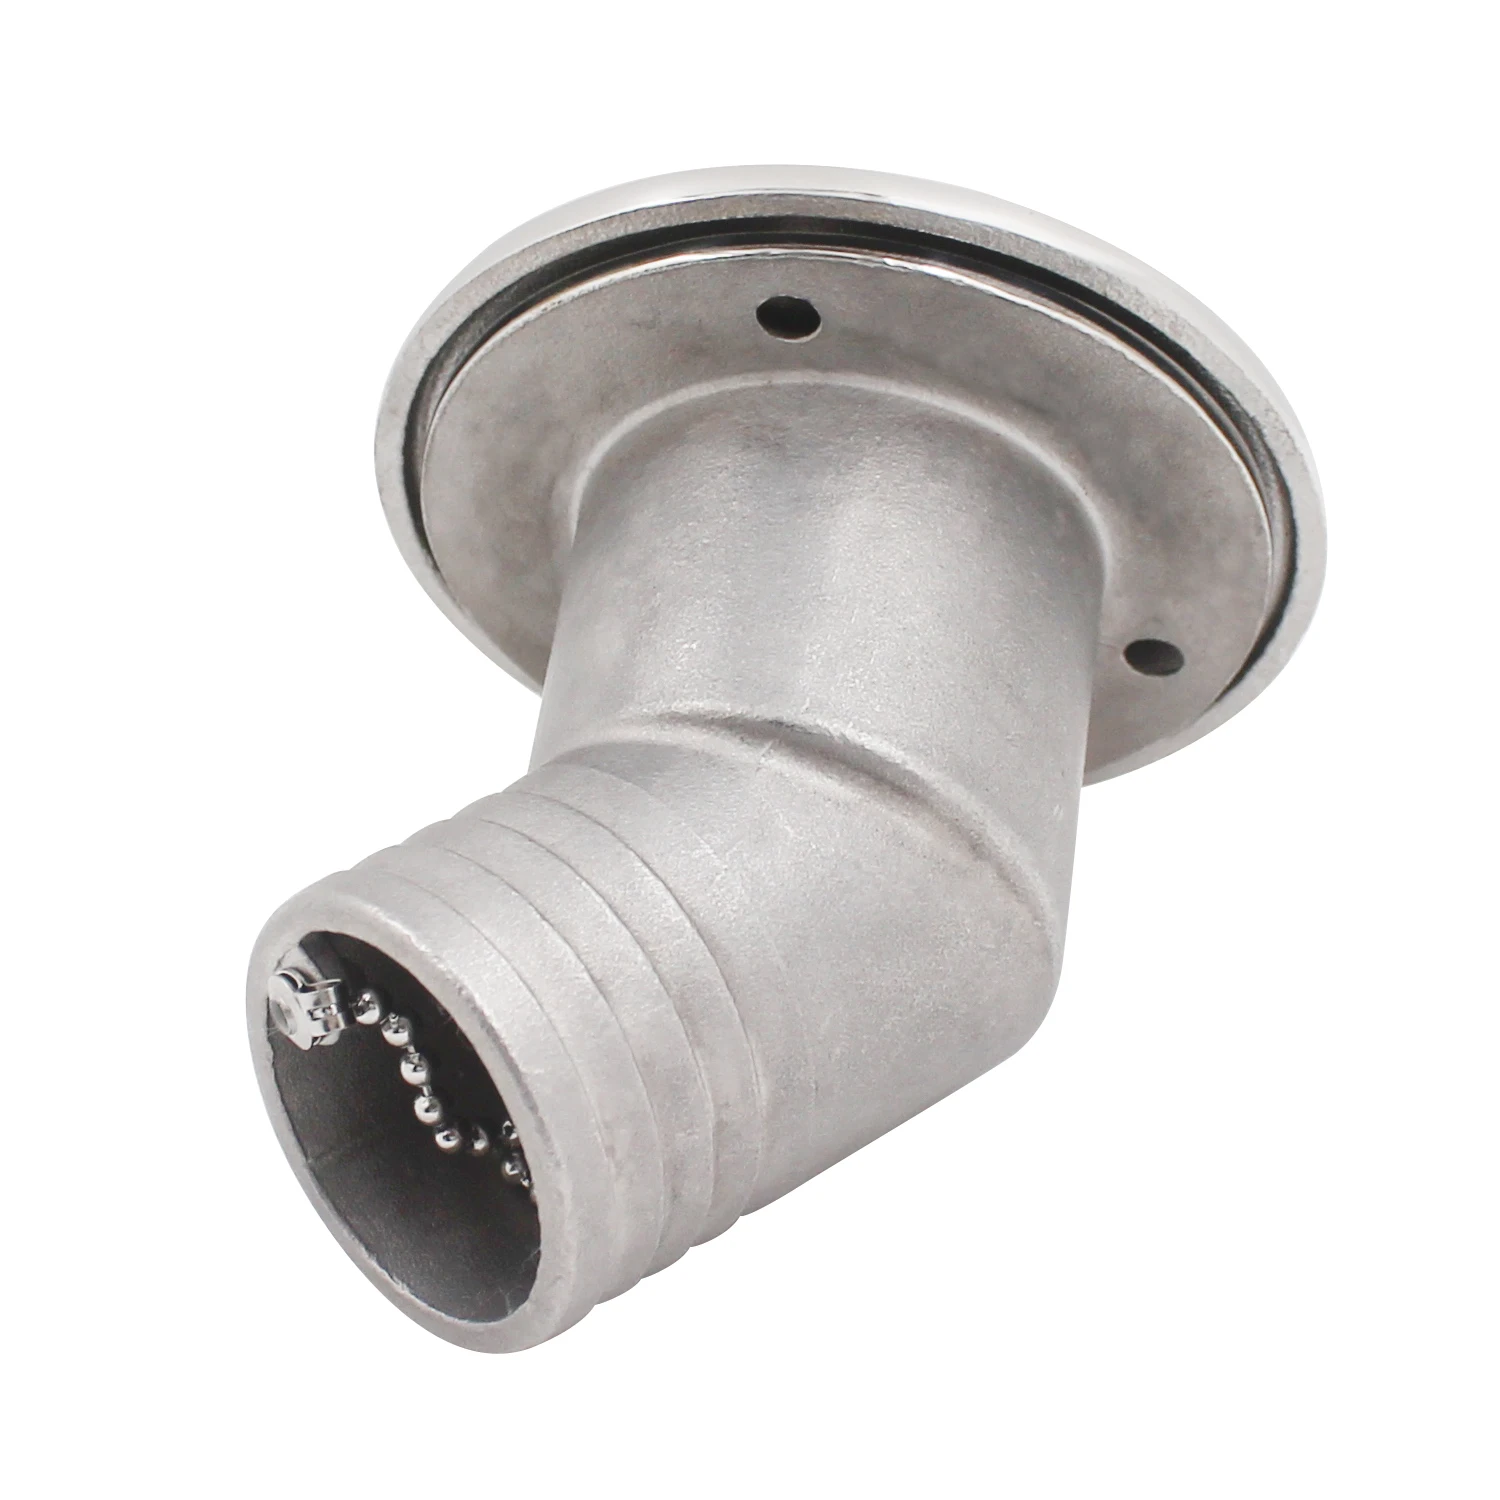 Boat Deck Fill Filler Cap Neck Angled Marine Stainless Steel 316 Yacht RV Trucks Tractors 1-1/2 inch (38 mm) enlarge